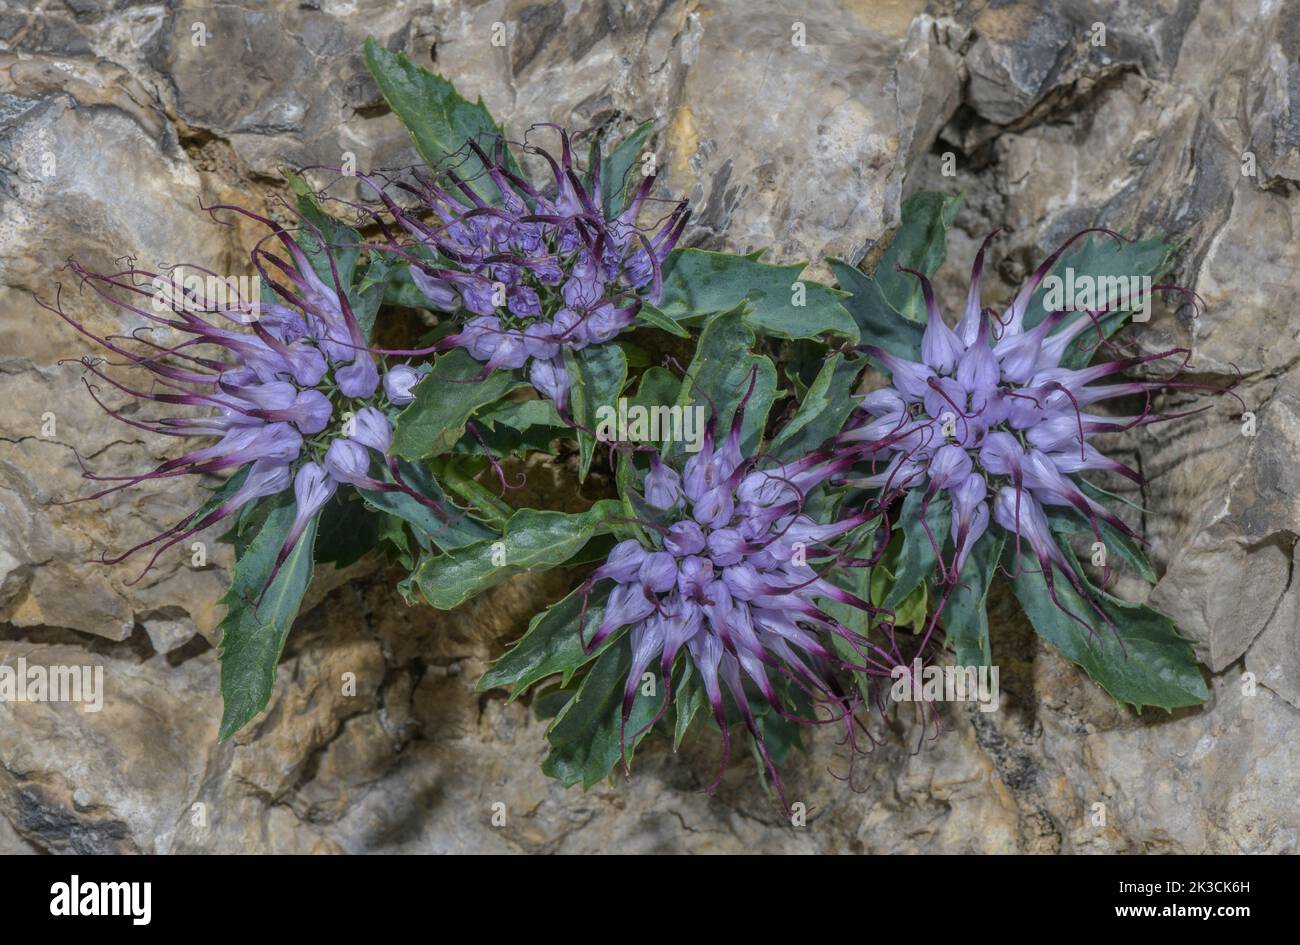 Tufted horned rampion, Physoplexis comosa, in flower on limestone cliff, Italian Alps. Stock Photo